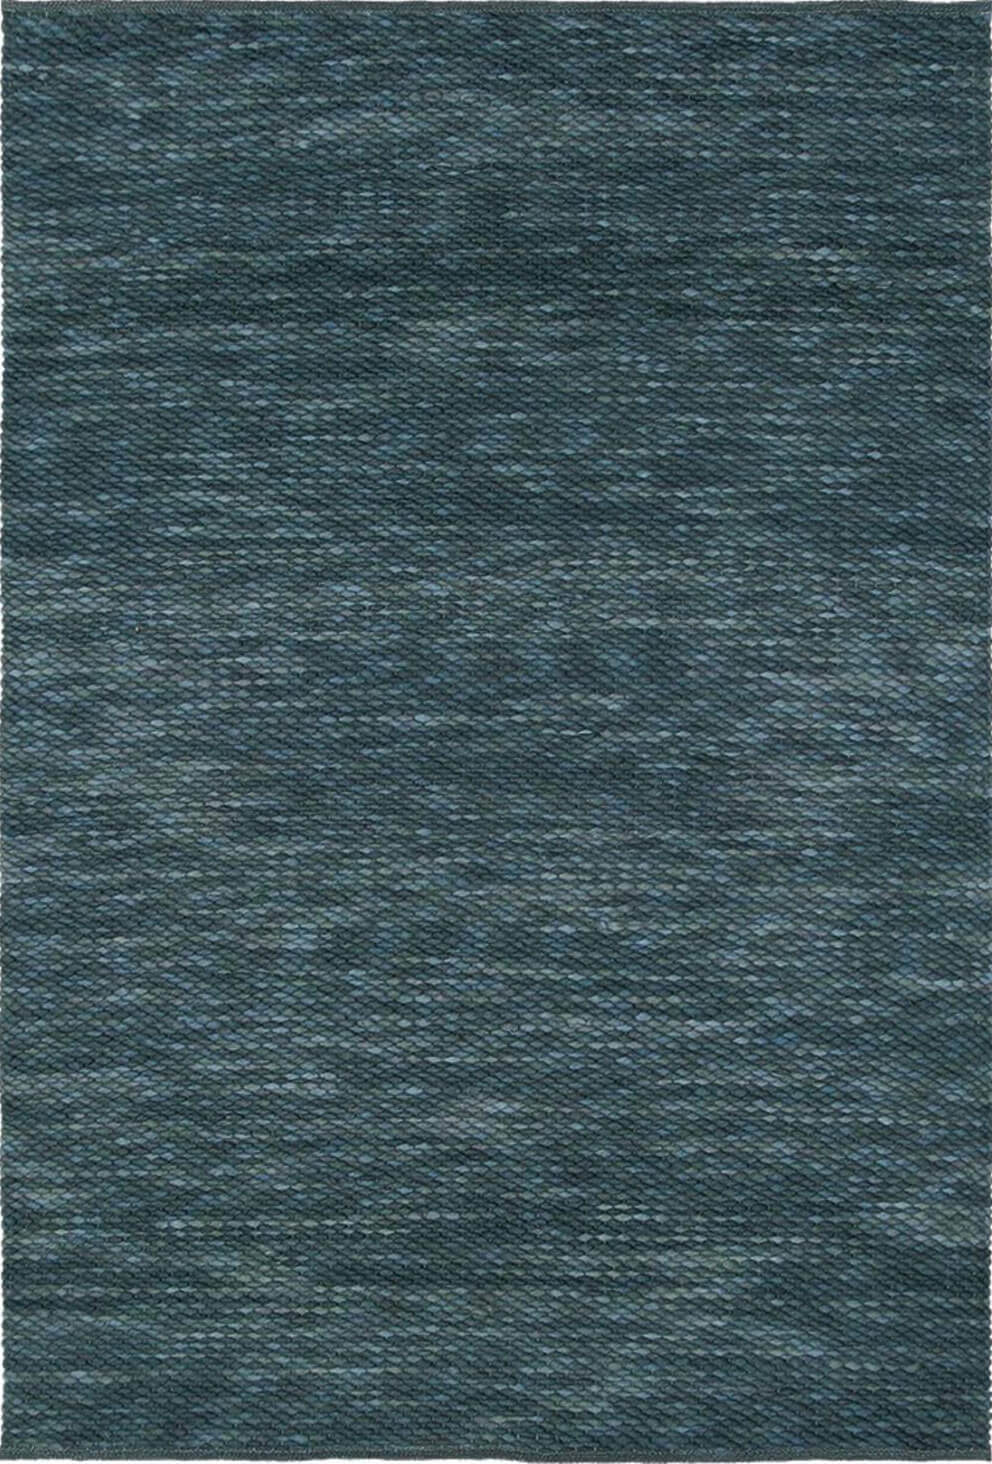 Pinto 29608 Rug by Brink & Campman ☞ Size: 170 x 230 cm